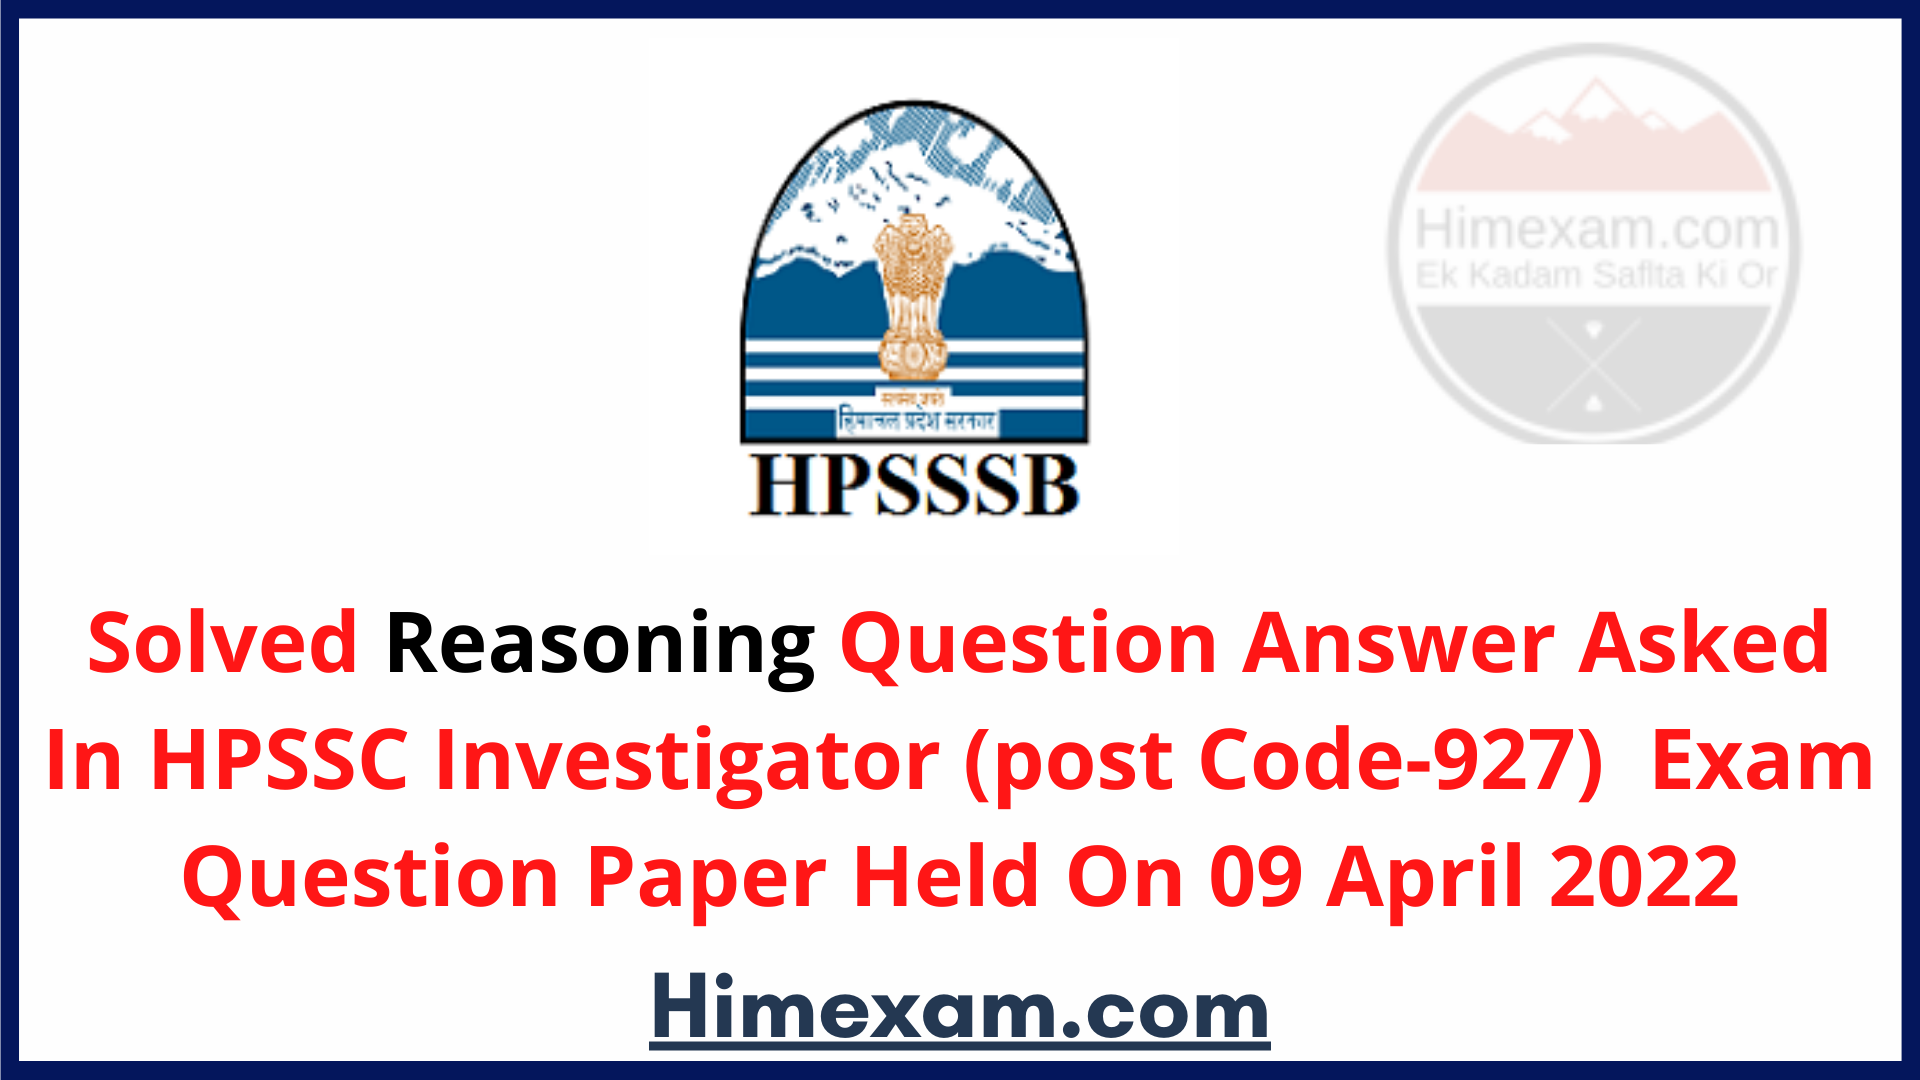 Solved Reasoning Question Answer Asked In HPSSC Investigator (post Code-927)  Exam Question Paper Held On 09 April 2022